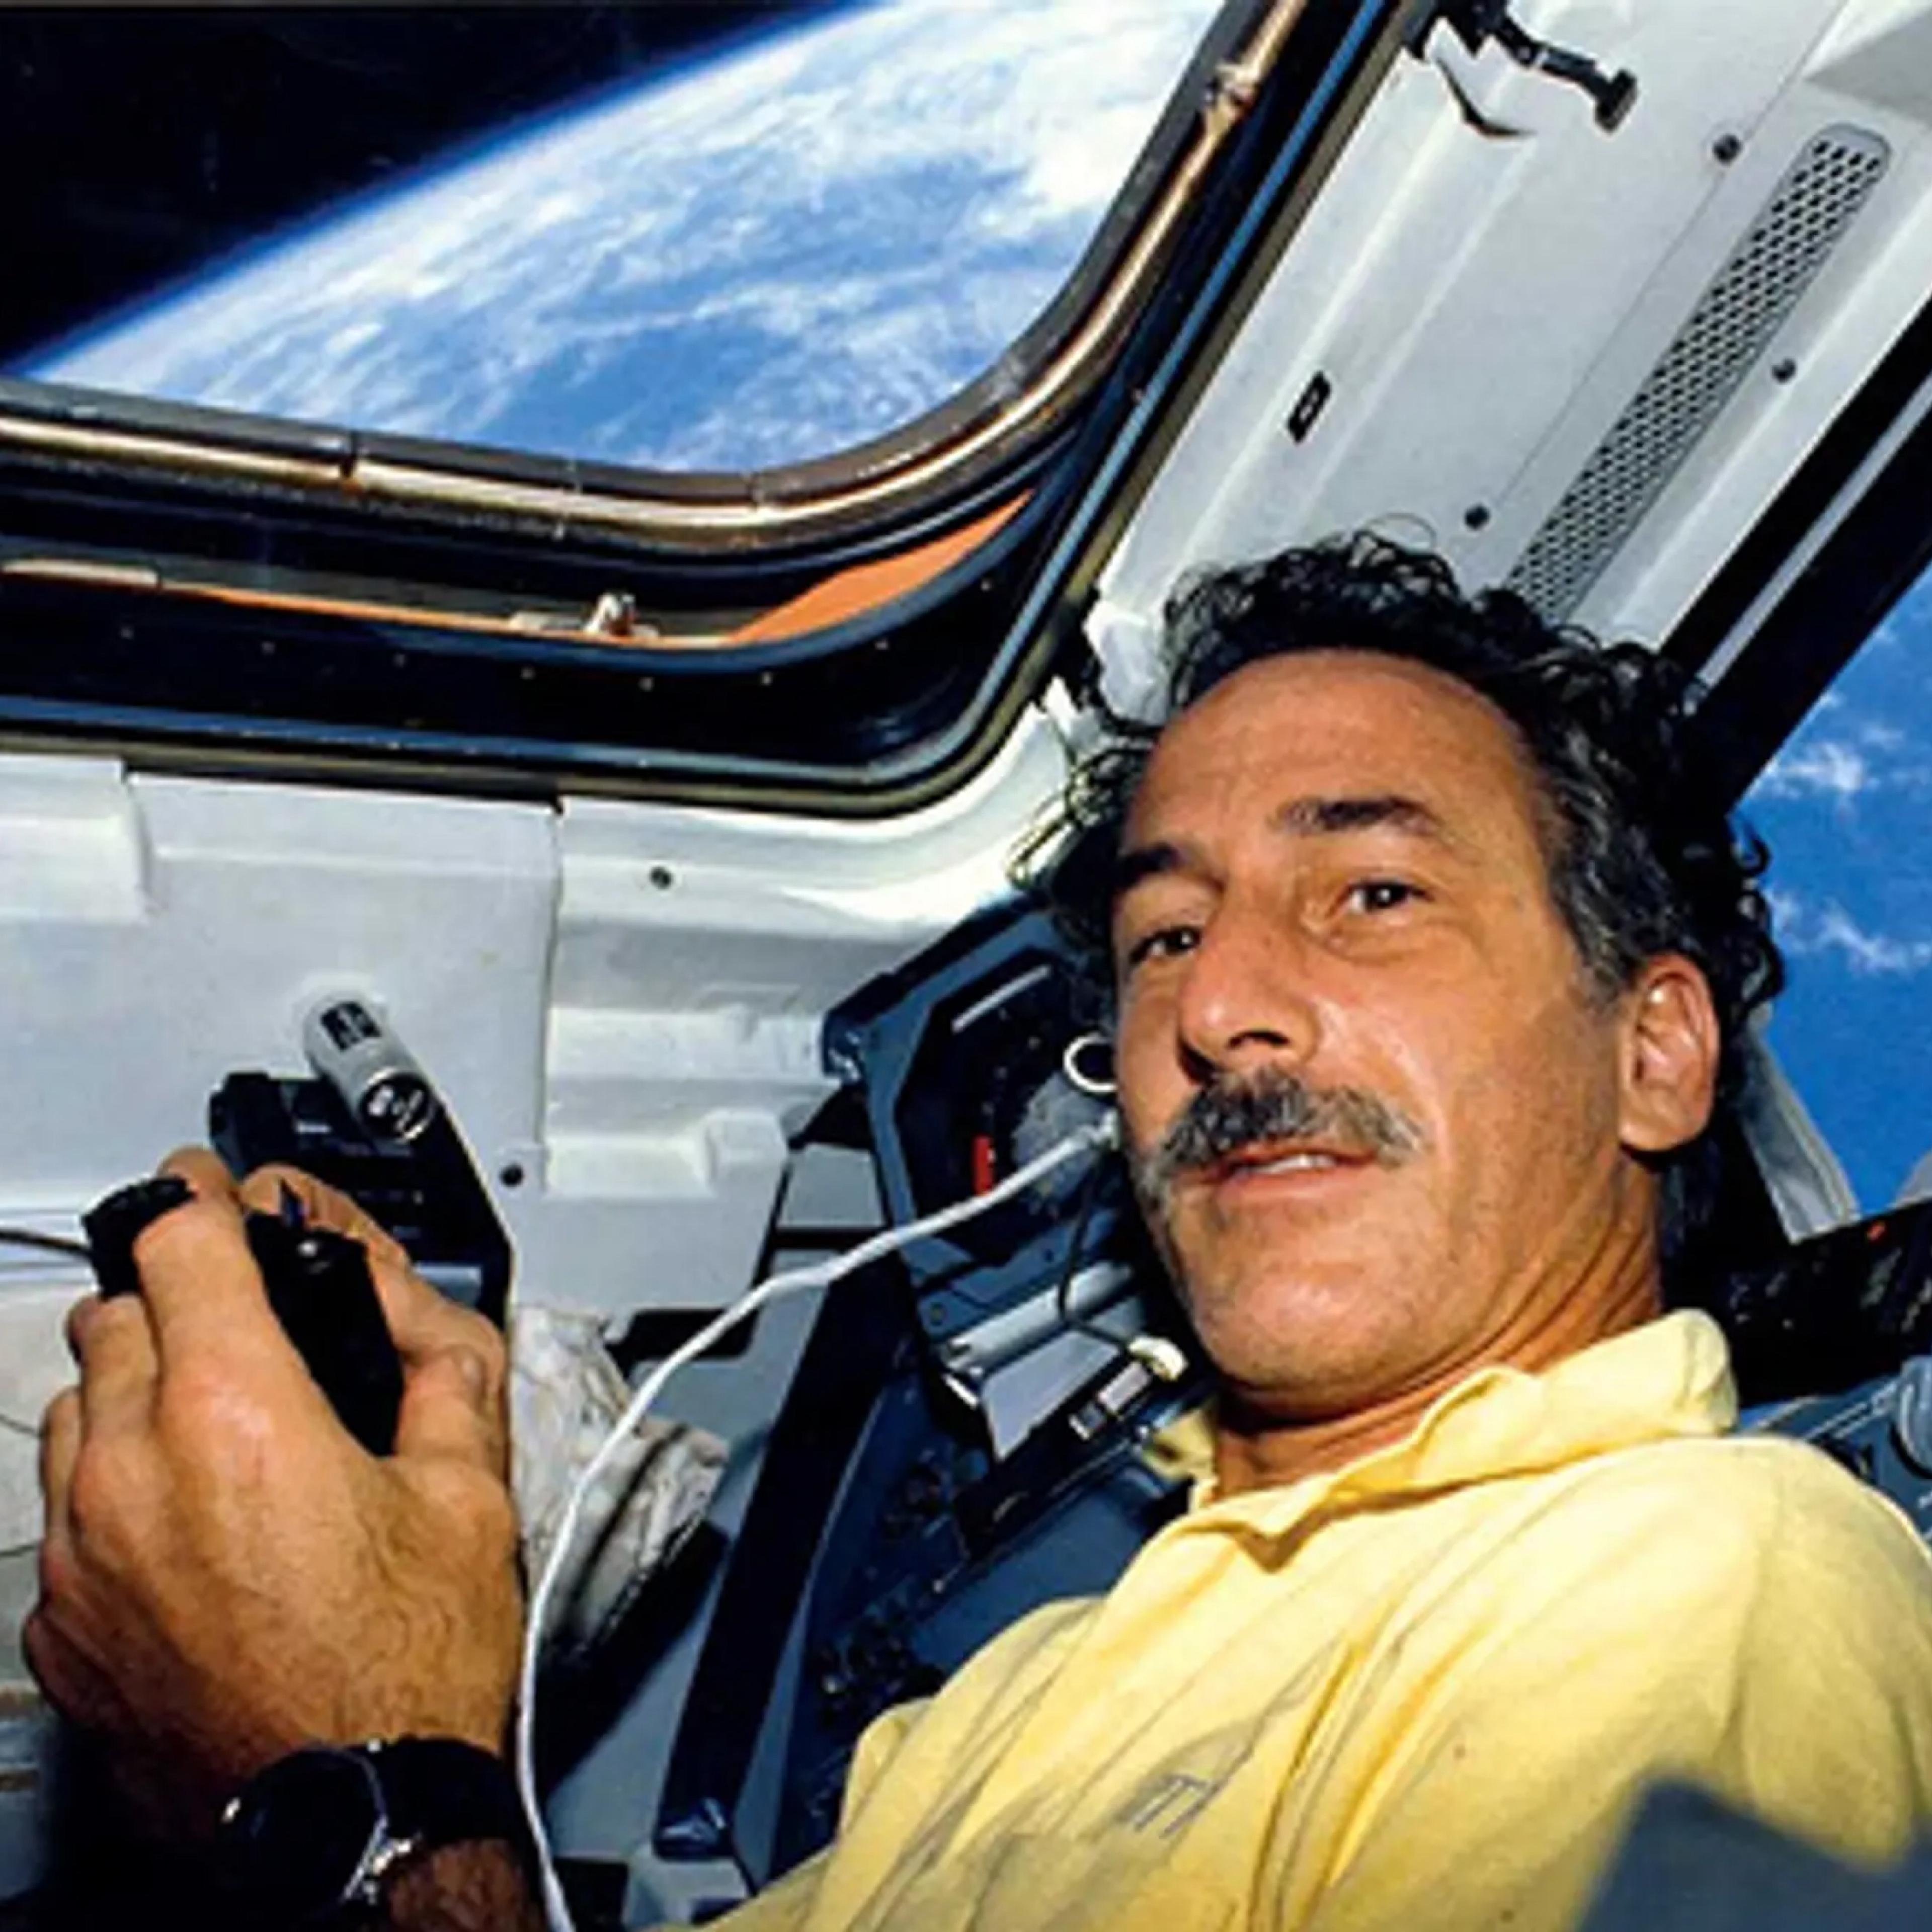 Astronaut Jeff Hoffman Reflects on the Impact of Space Travel on Perspective 